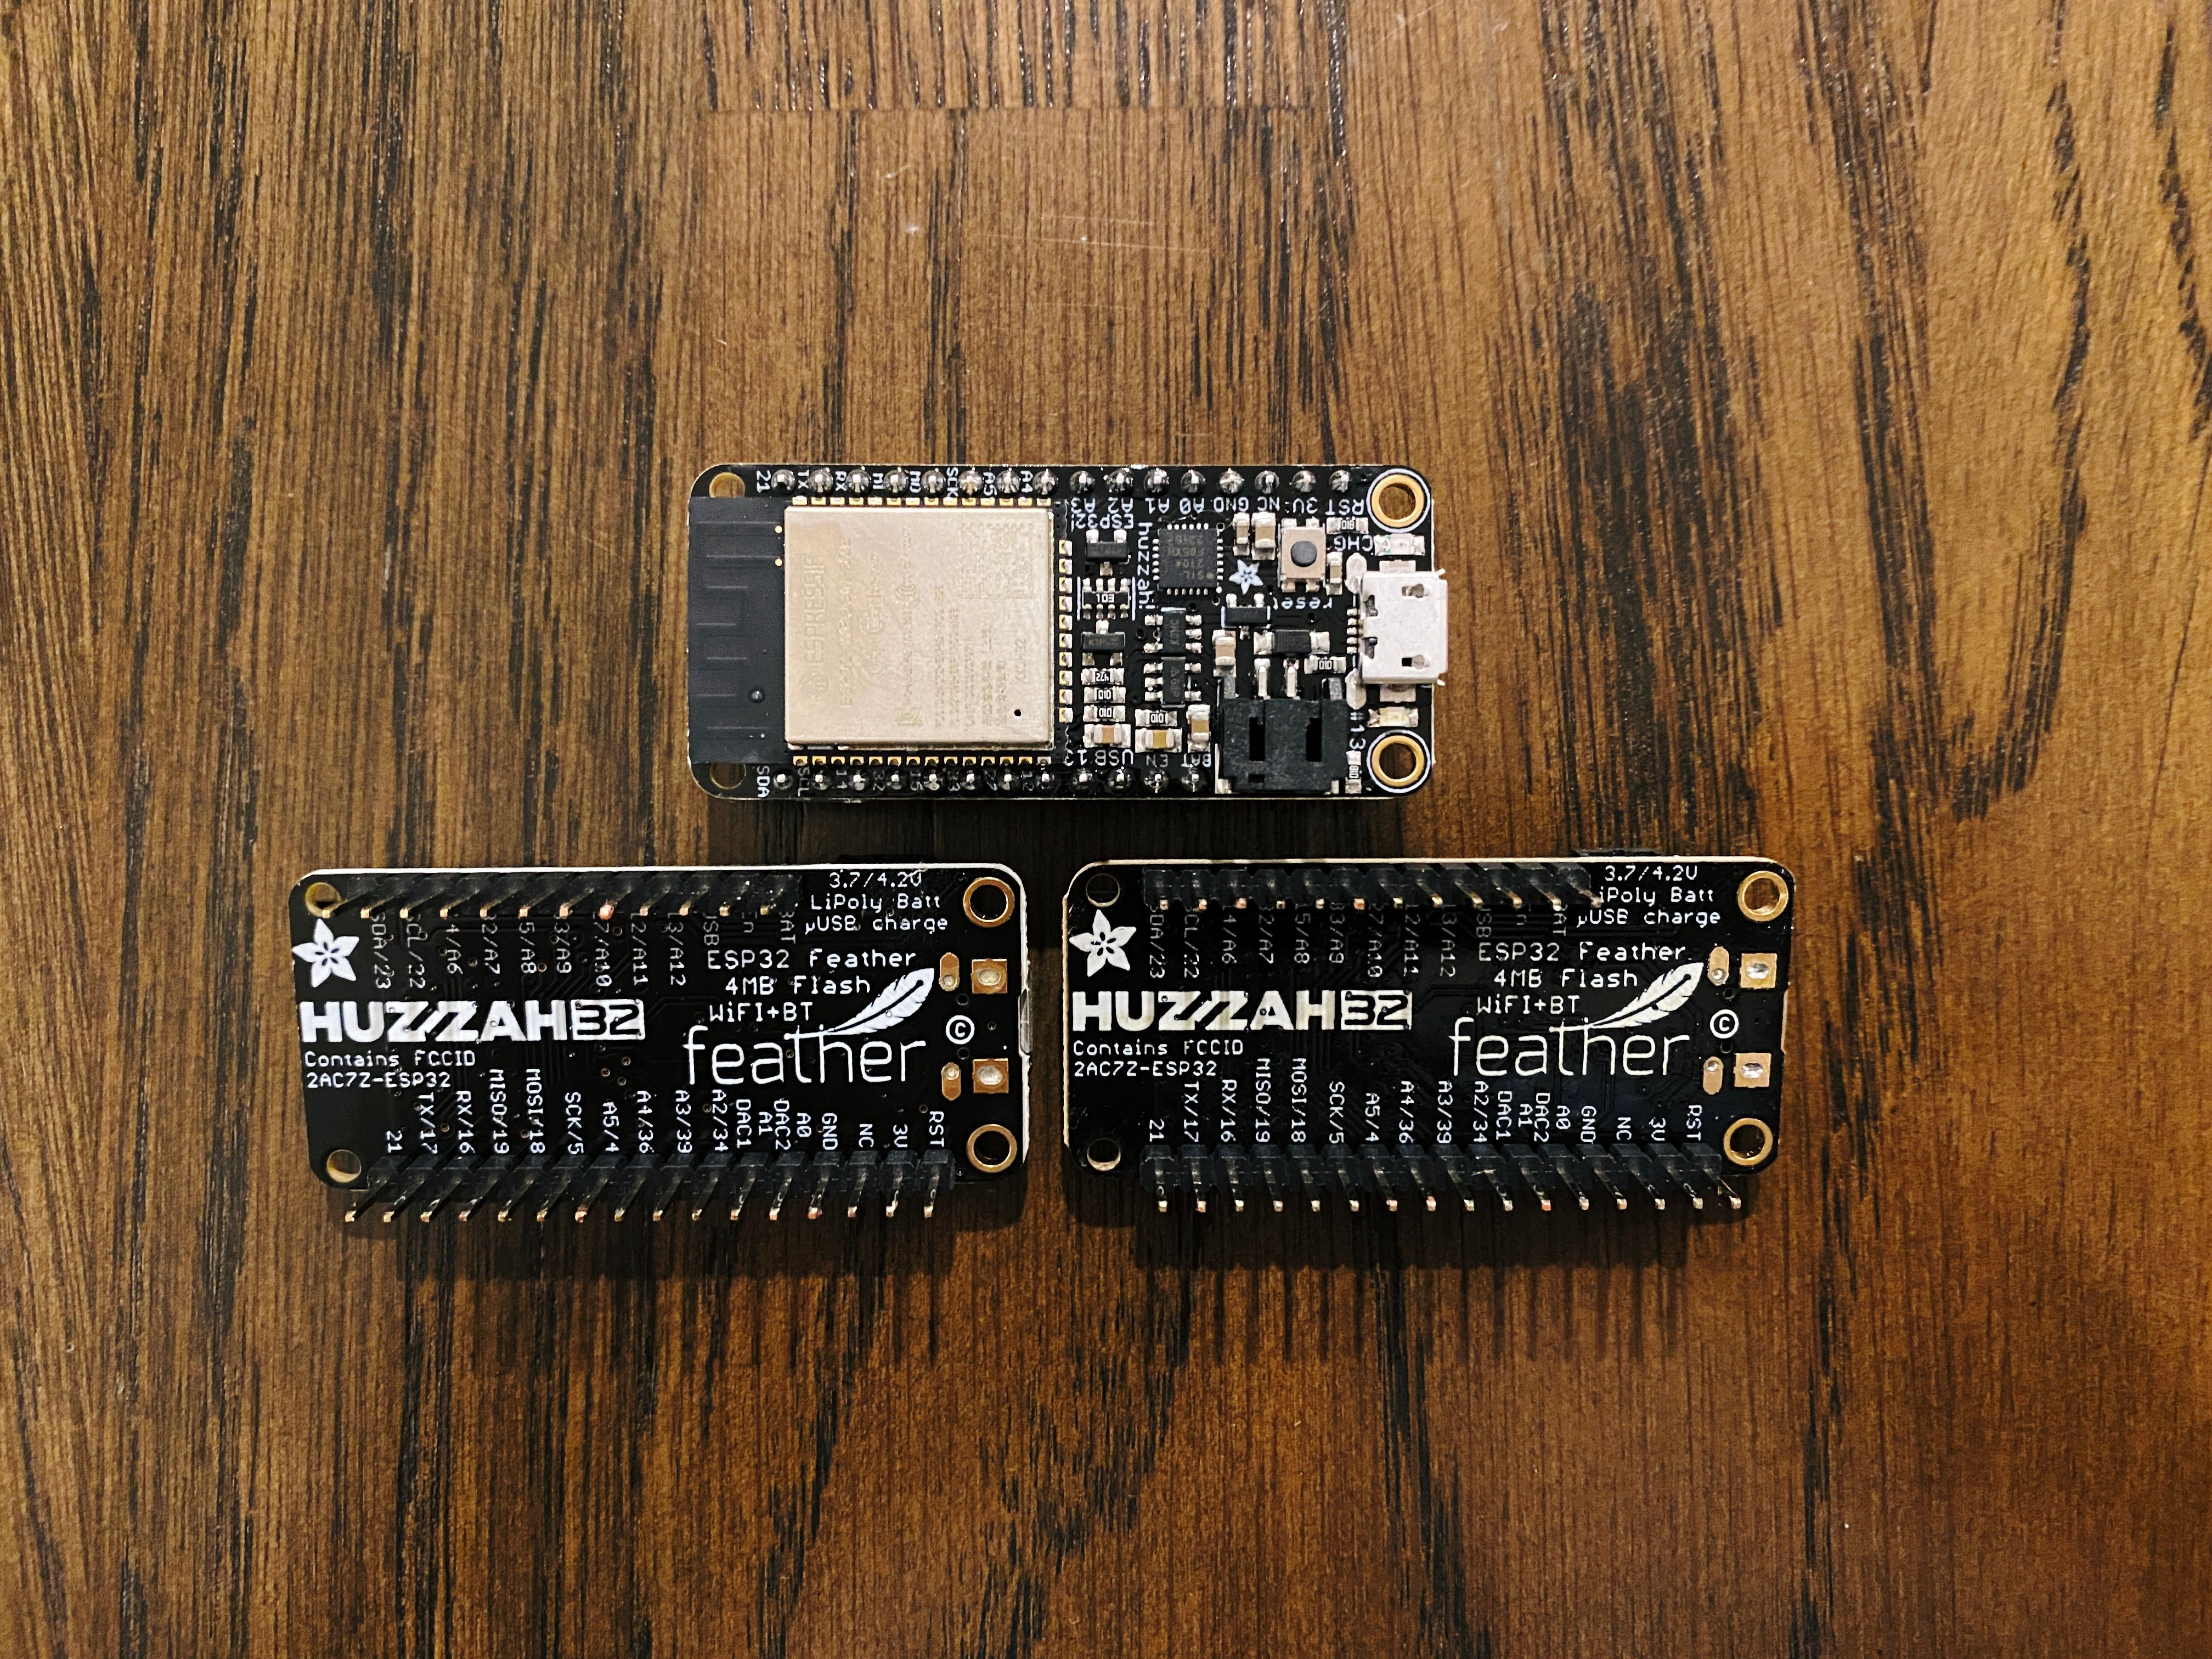 A photo of three ESP32 microcontrollers. They're teensy little circuit boards, roughly 5cm in length and 2cm in width, festooned with electronic components, and with two rows of pins coming out of them on one side for plugging things thing.